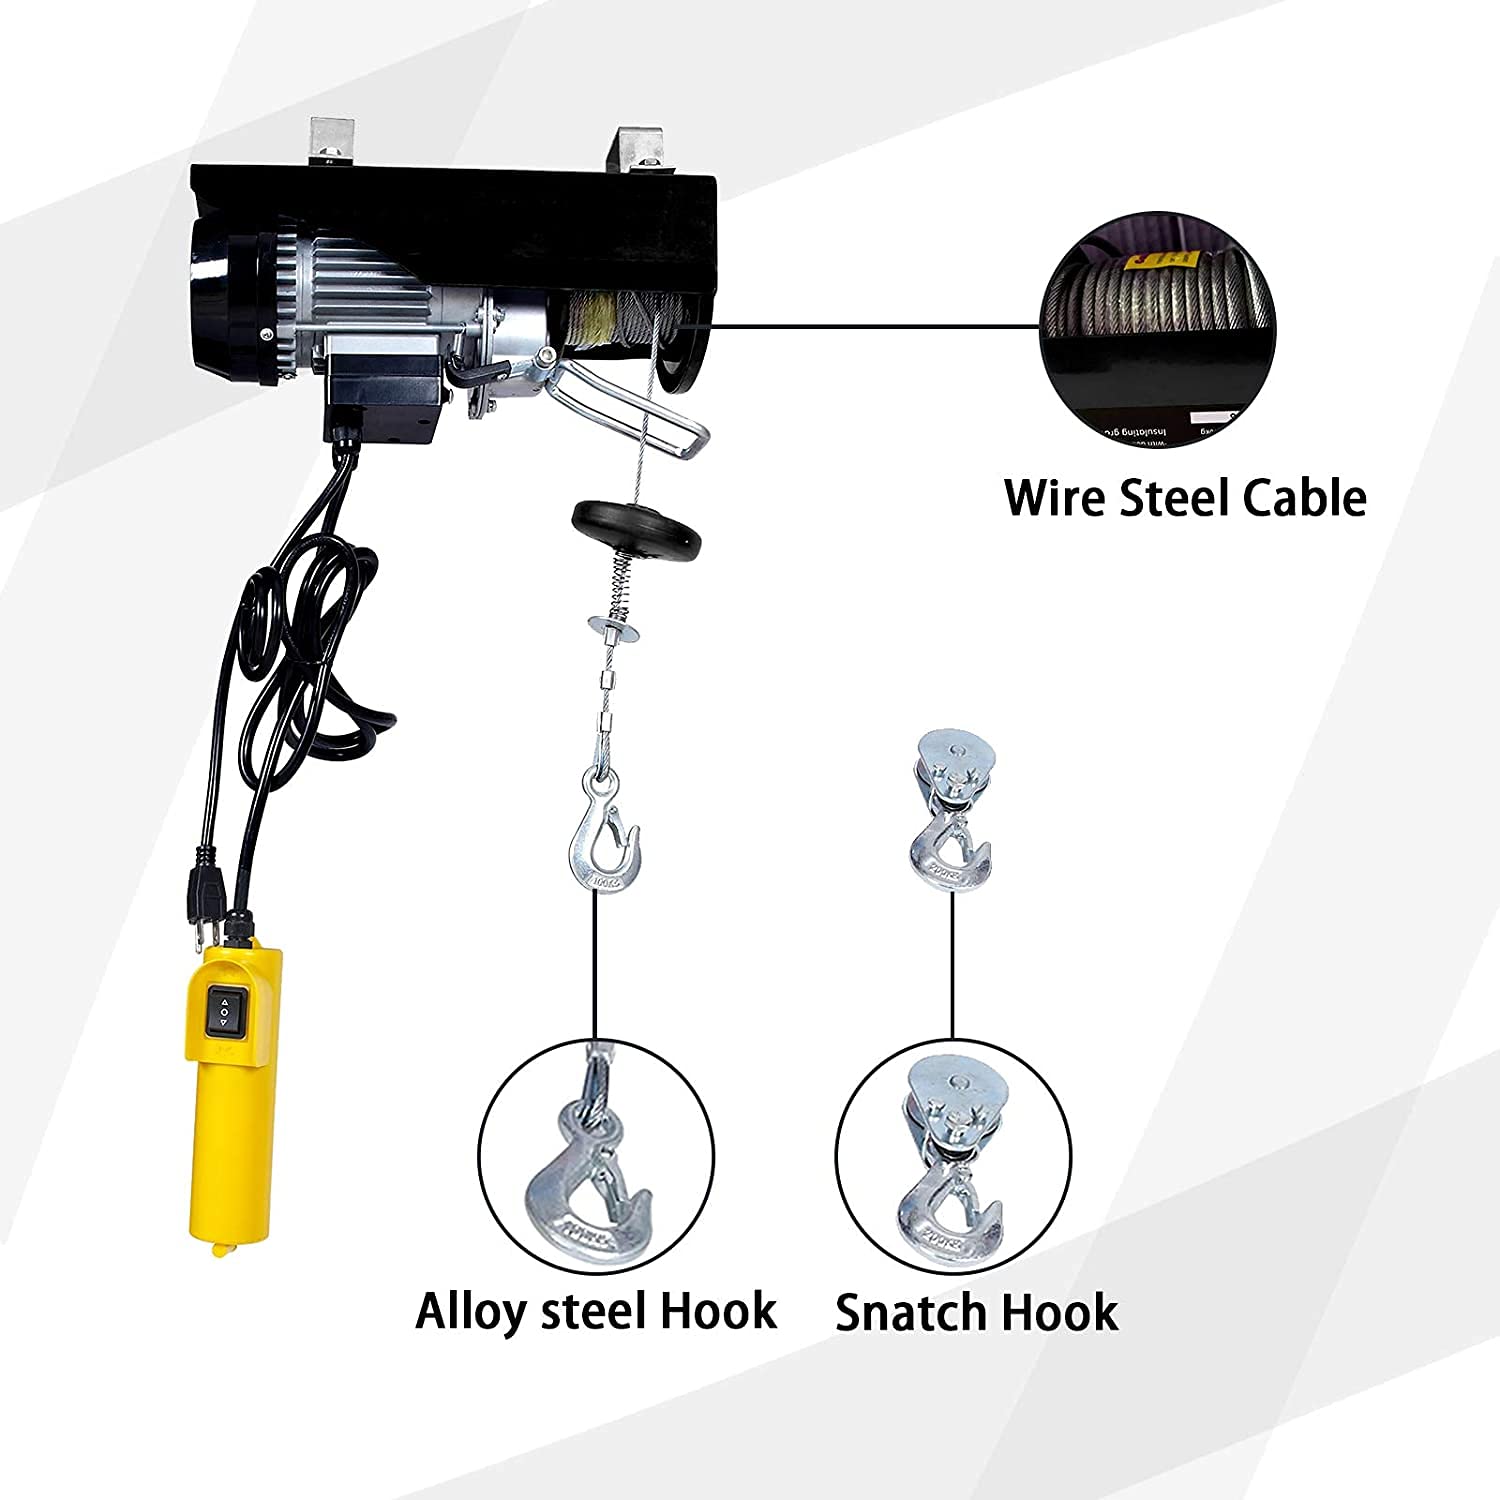 OPENROAD 880 LBS Lift Electric Hoist Crane Remote Control Power System for Garage Ceiling Crane Overhead (400kg) hoists OPENROAD   